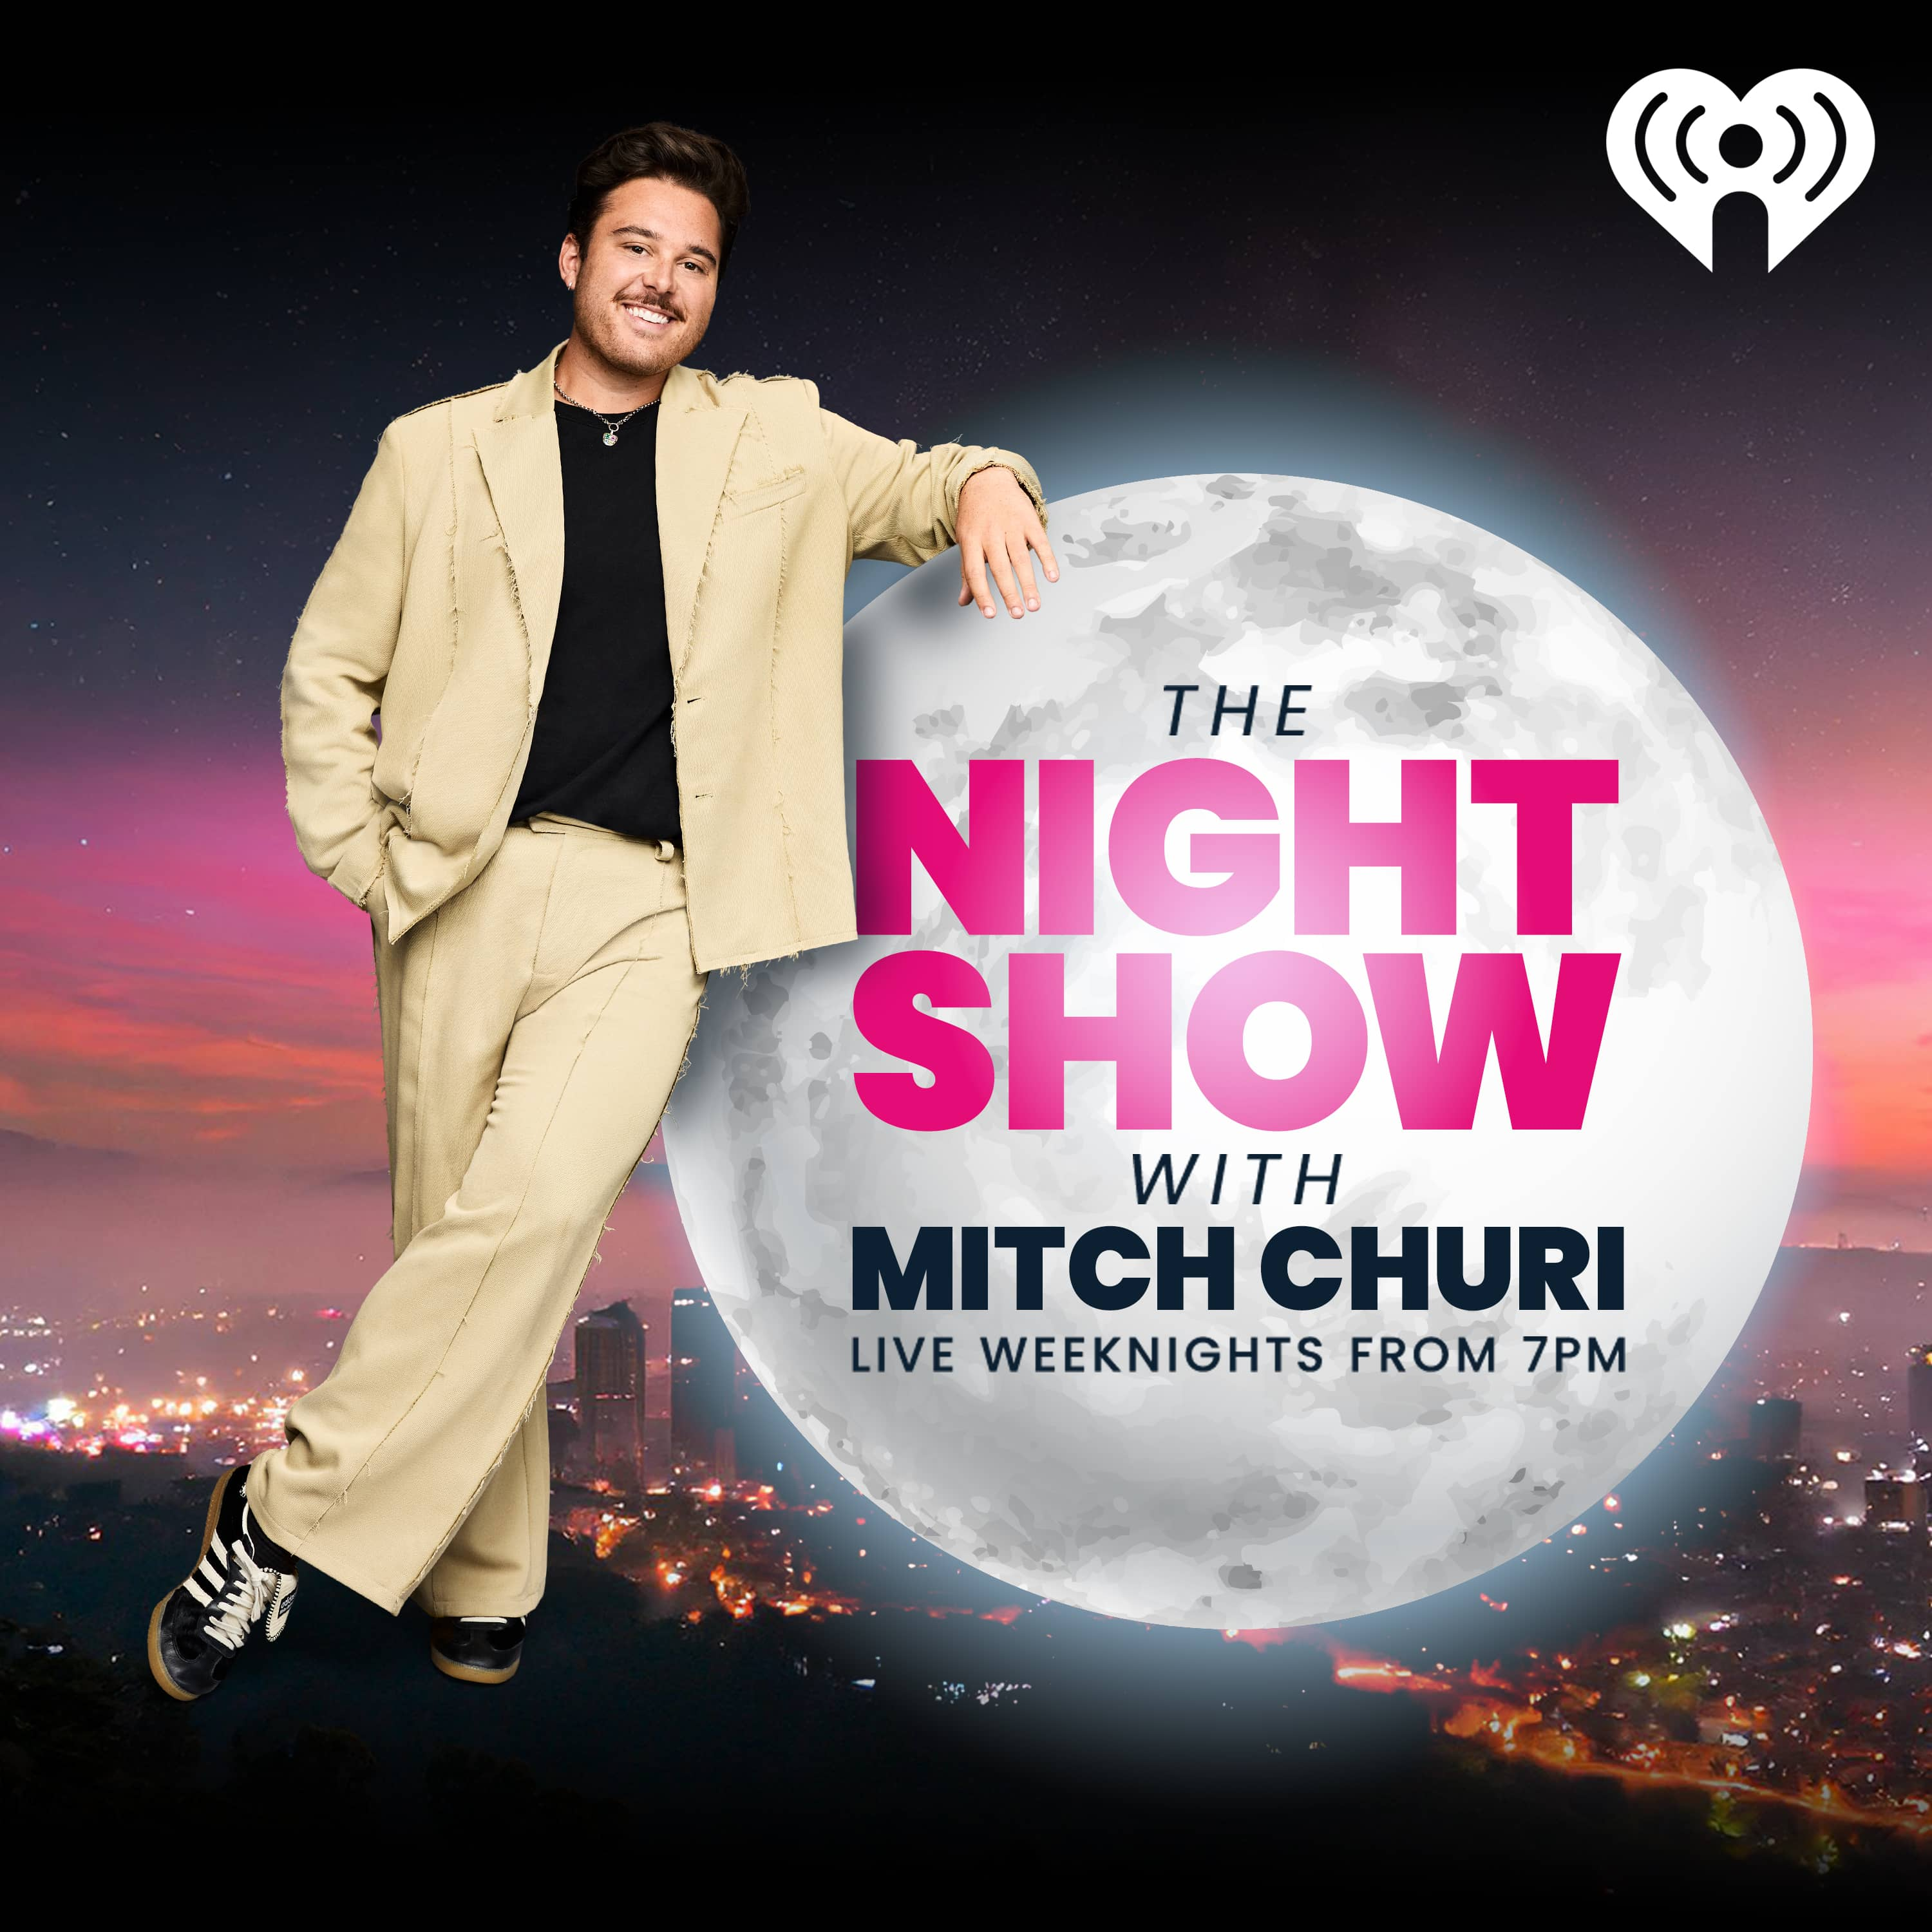 The Night Show LIVE from a TRAPEZE! With Mitch Churi and Tones And I